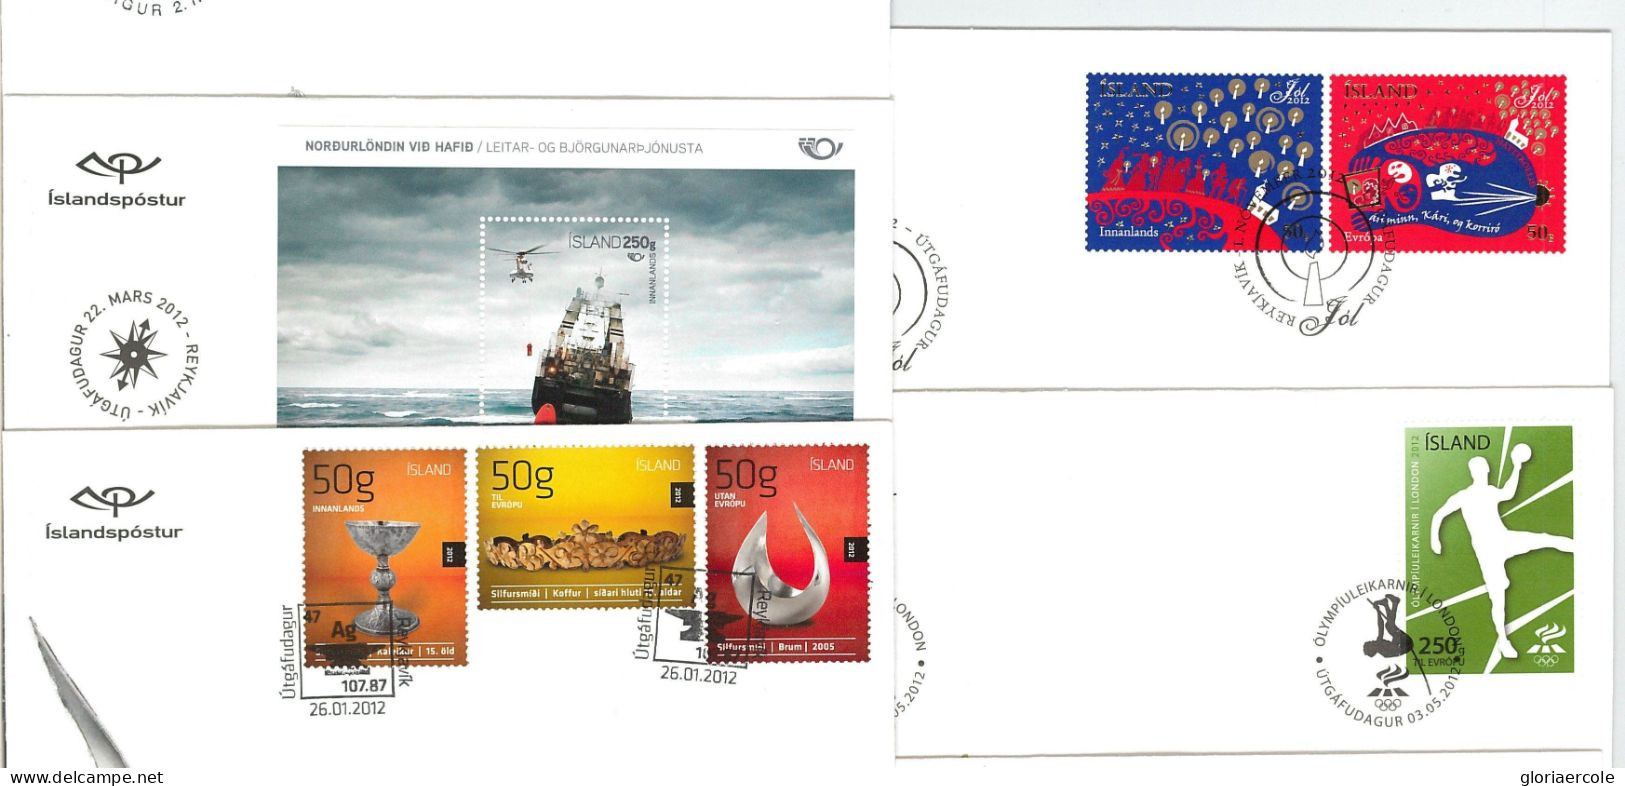 58170 - ISLAND Iceland - POSTAL HISTORY: 2012 Set Of 10 FDC COVERS - BIRDS Sport - FDC